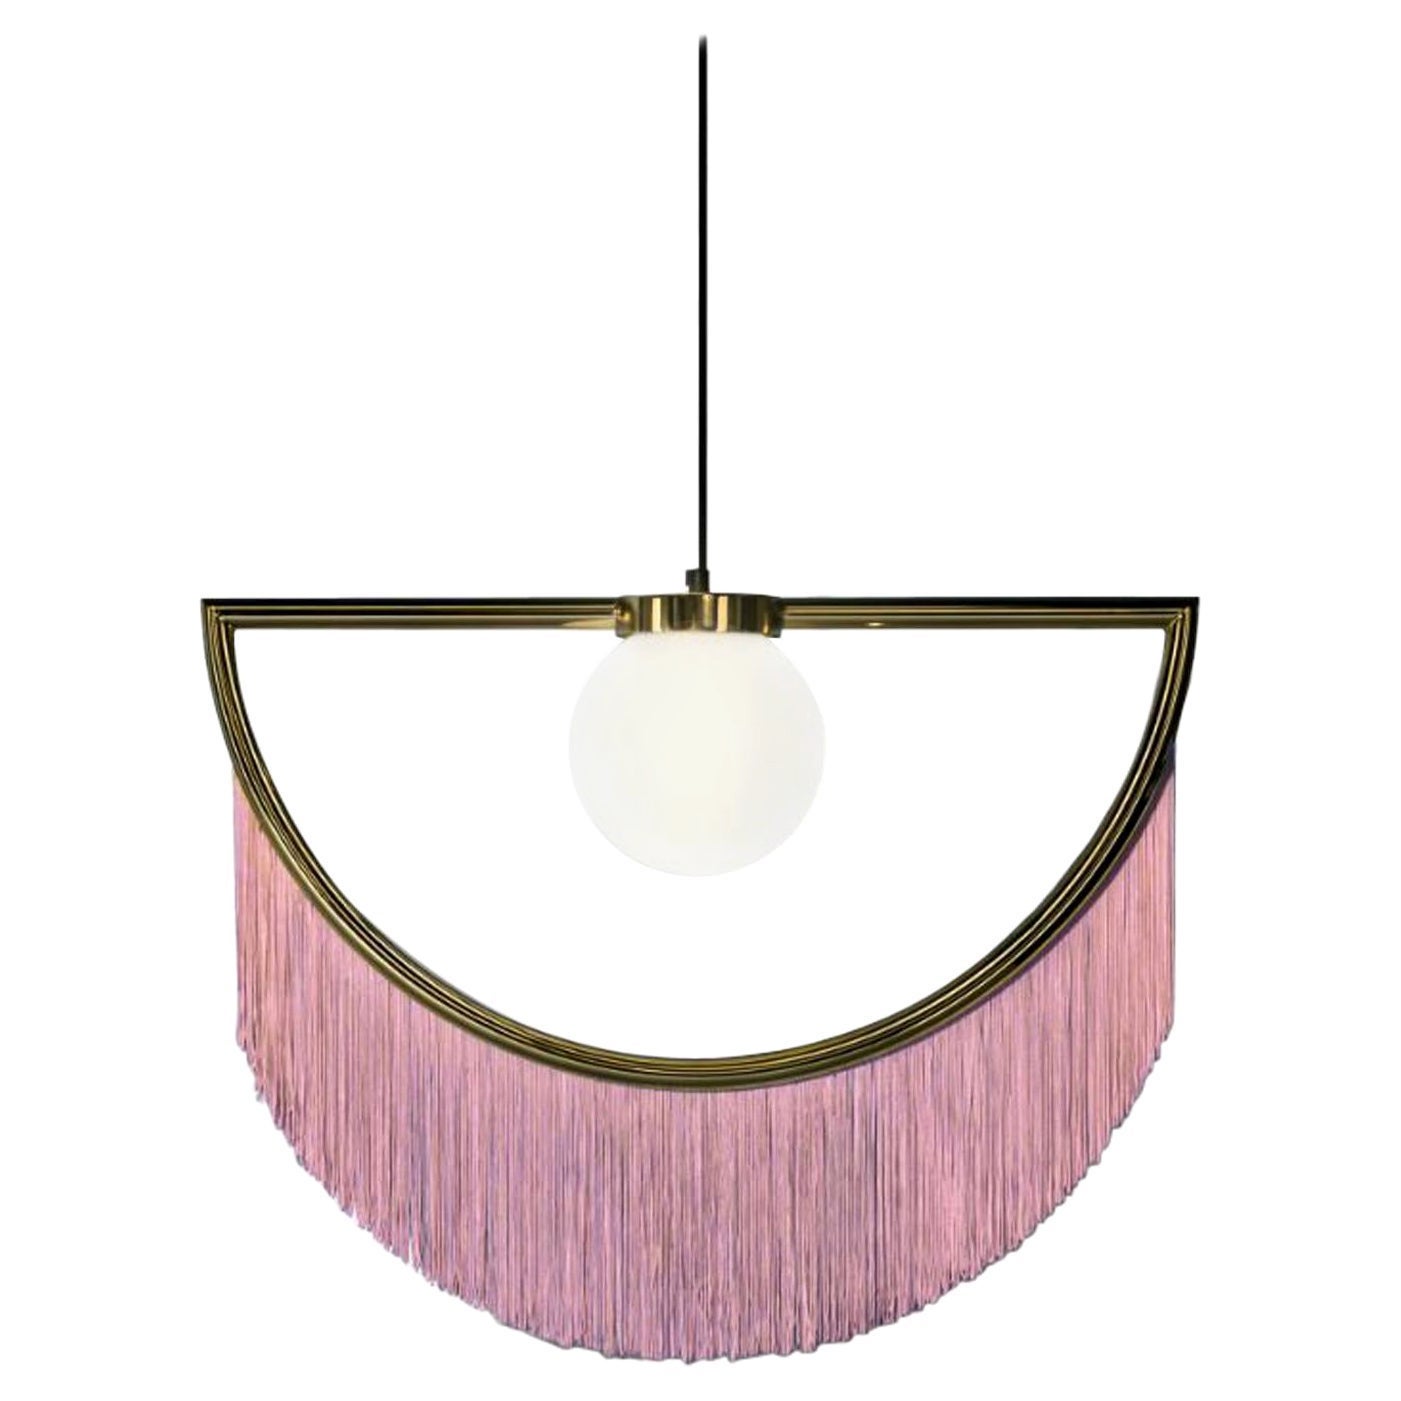 Wink Ceiling Lamp by Masquespacio